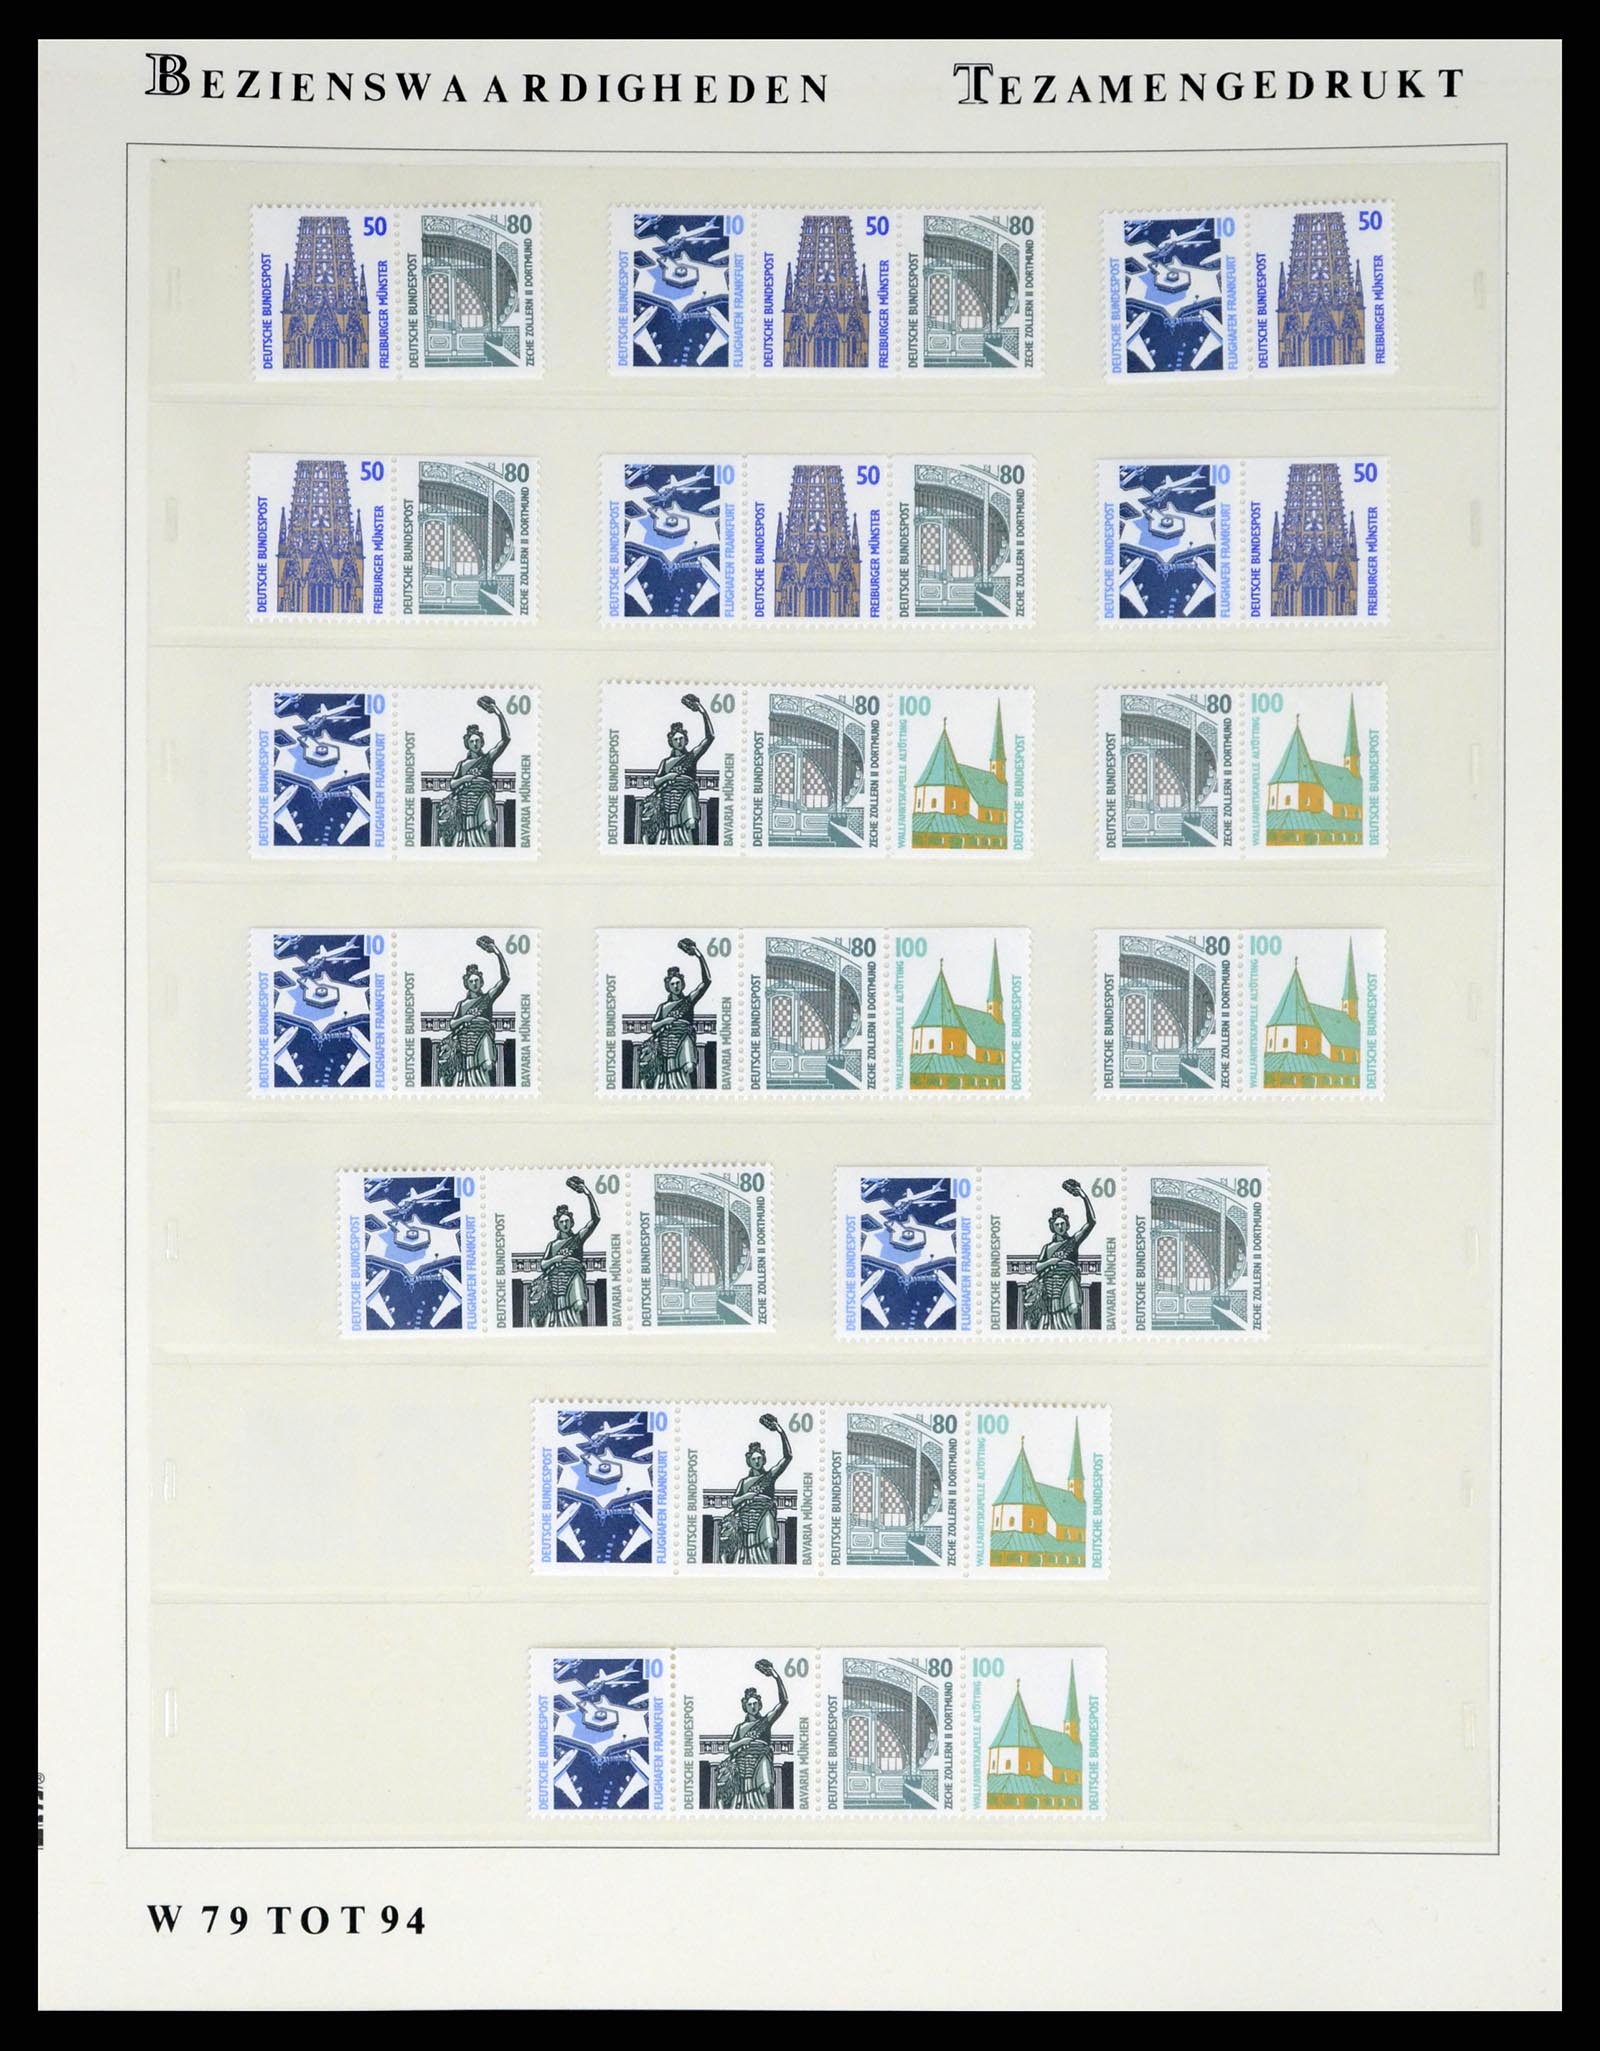 37354 038 - Stamp collection 37354 Bundespost and Berlin 1955-2000.